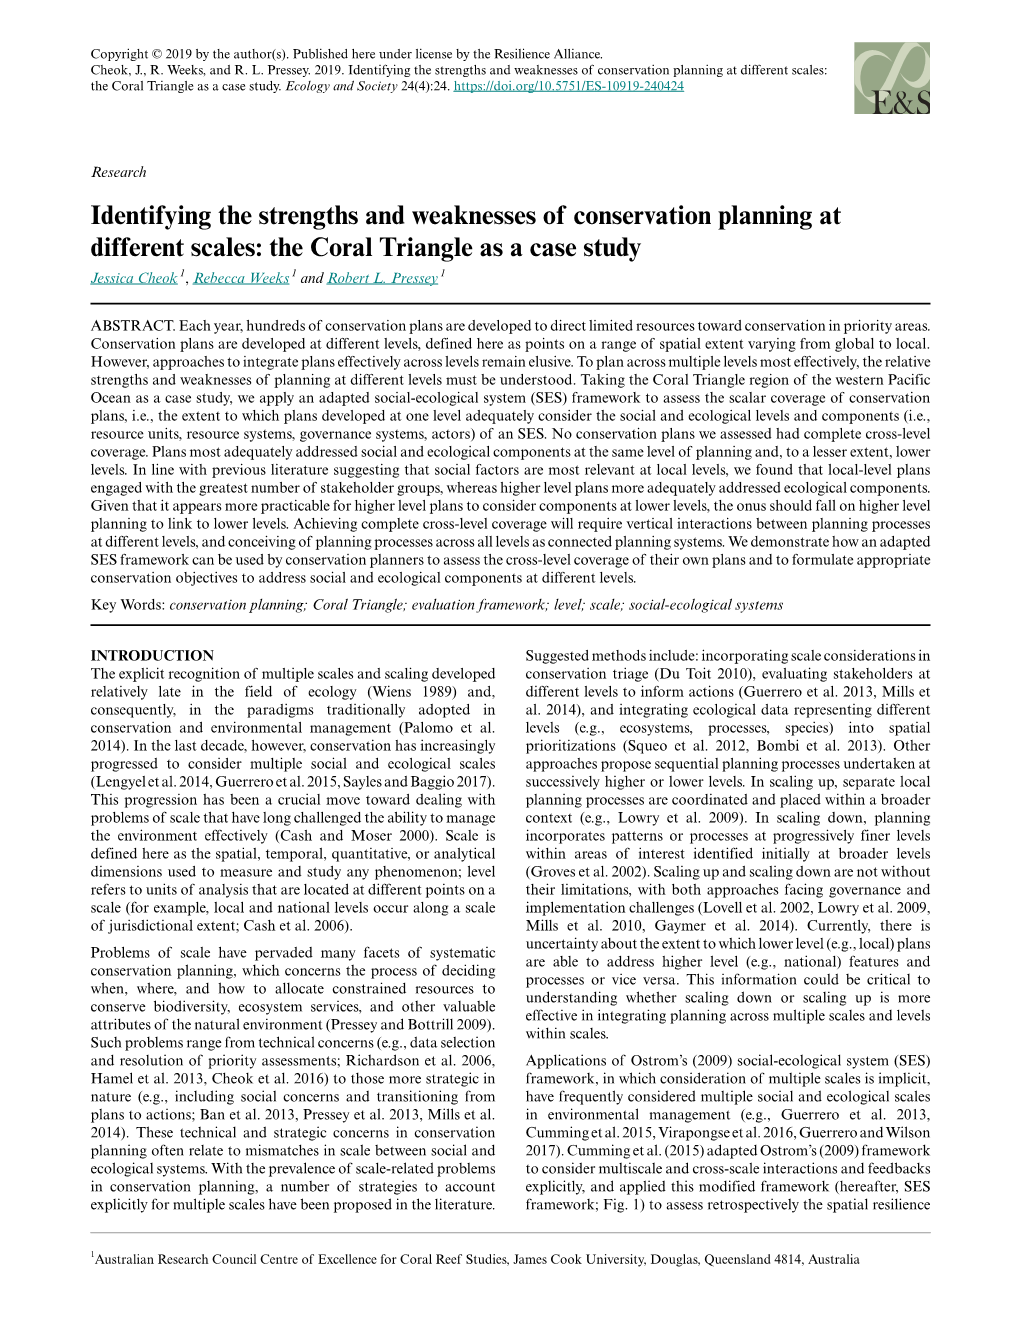 Identifying the Strengths and Weaknesses of Conservation Planning at Different Scales: the Coral Triangle As a Case Study